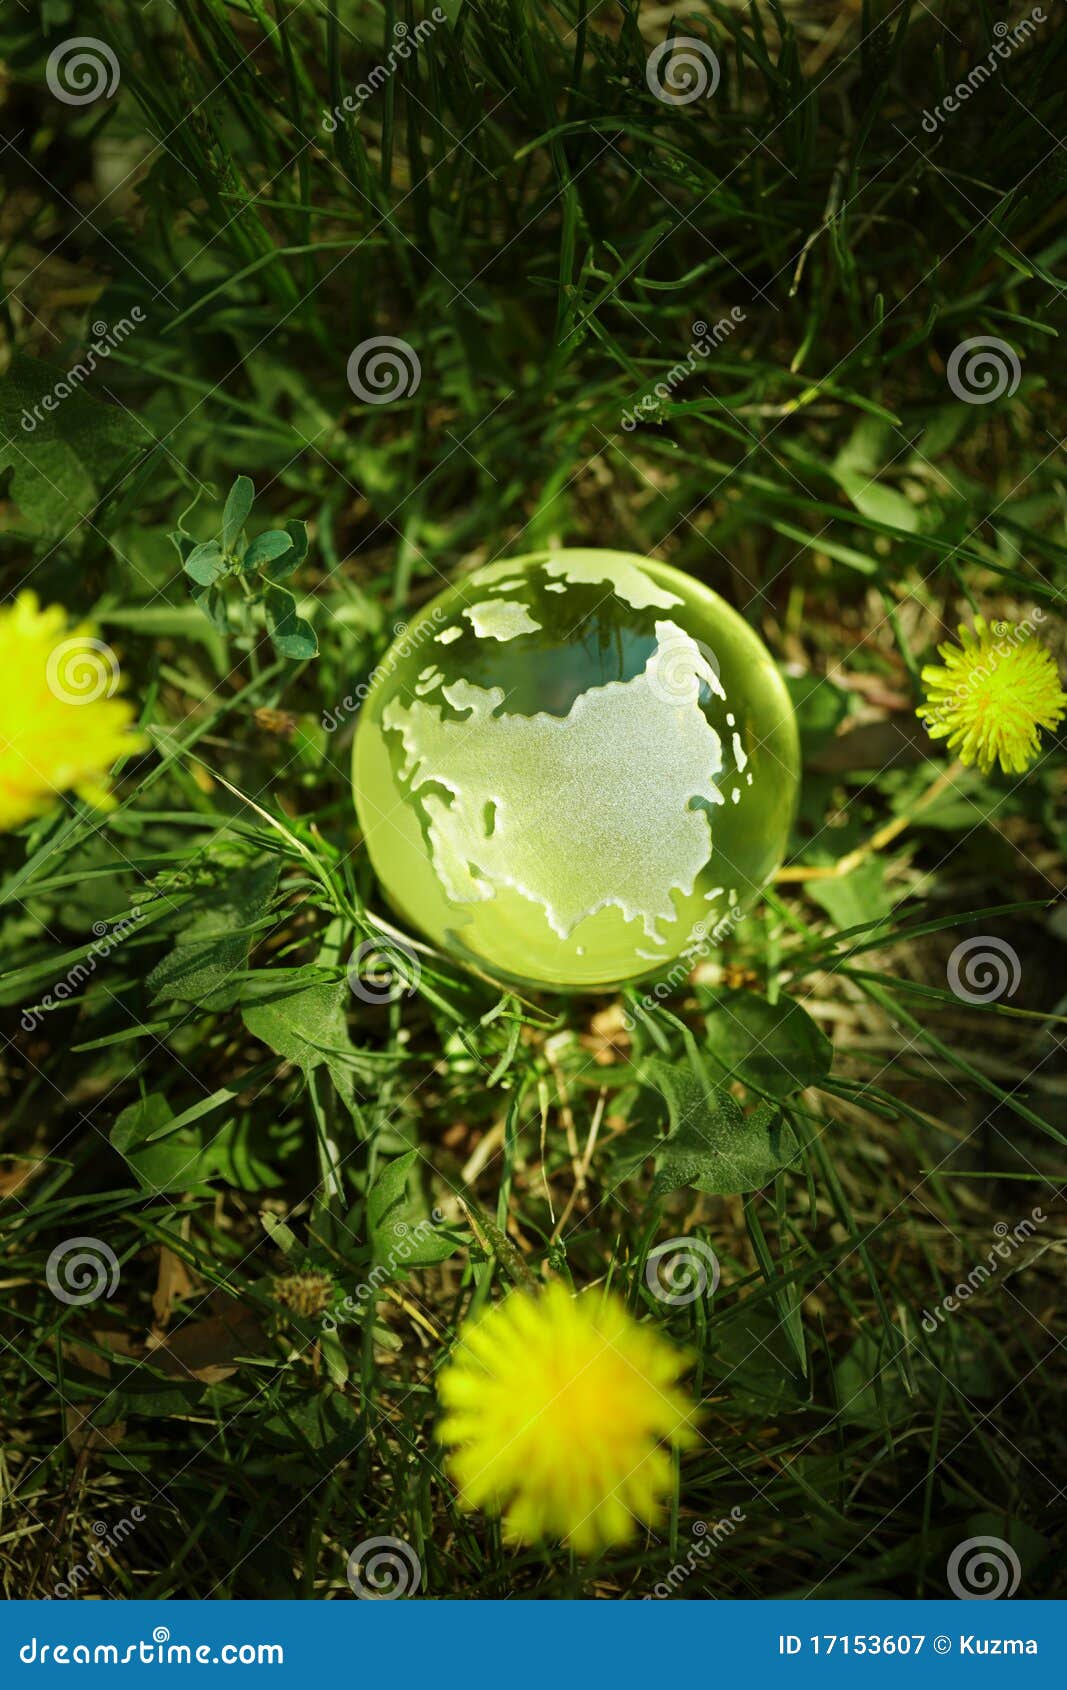 Clean nature stock image. Image of transparent, concept - 17153607